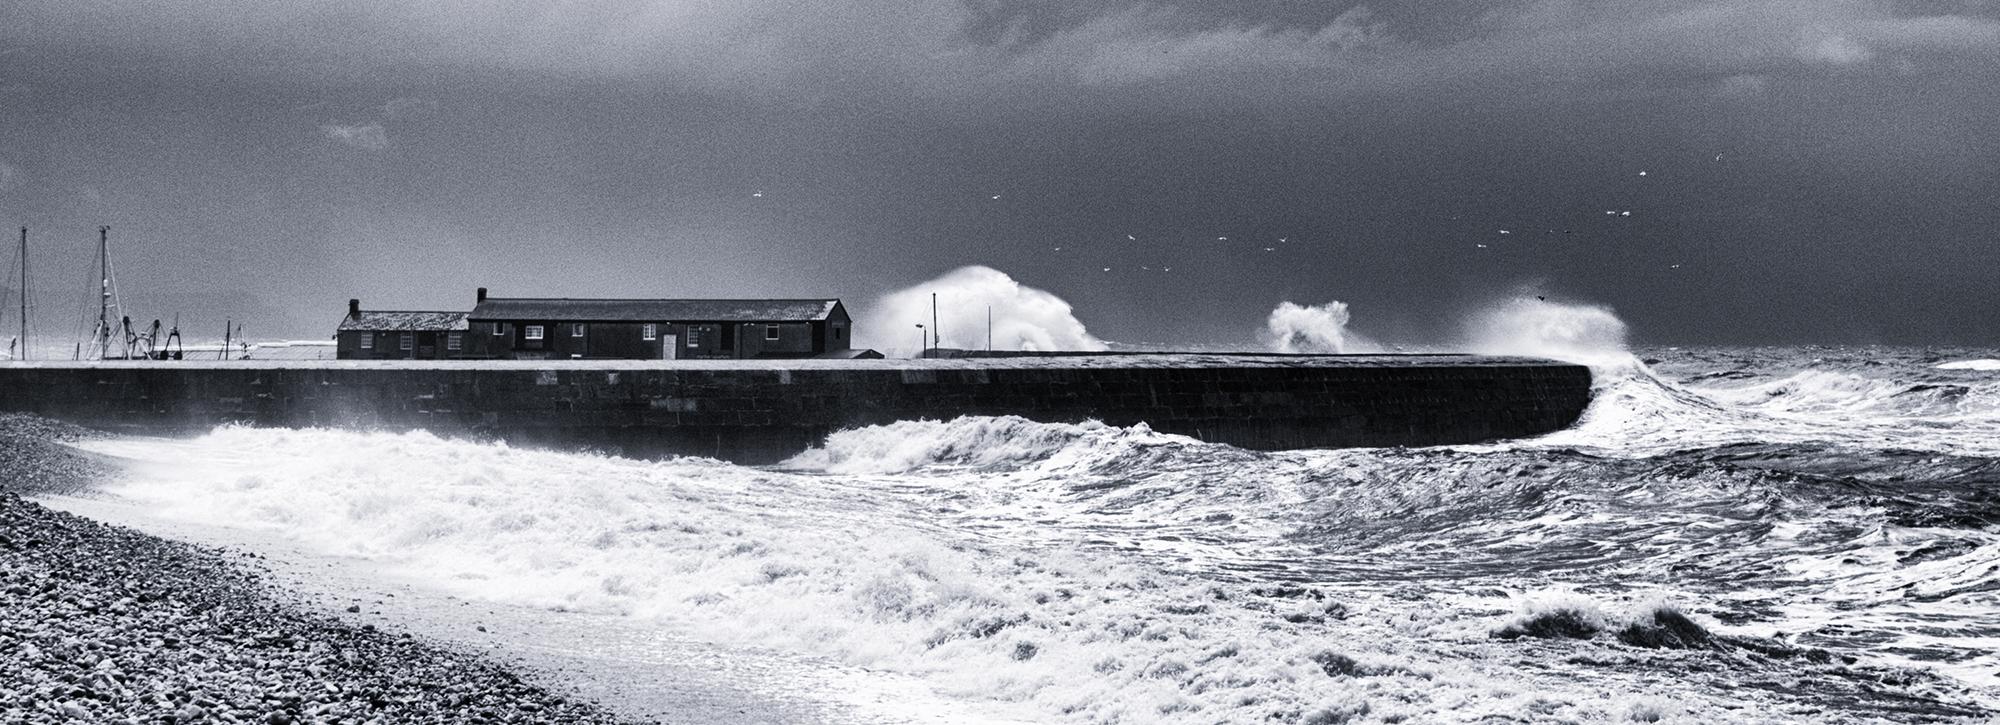 Overtopping at the Cobb Lyme Regis